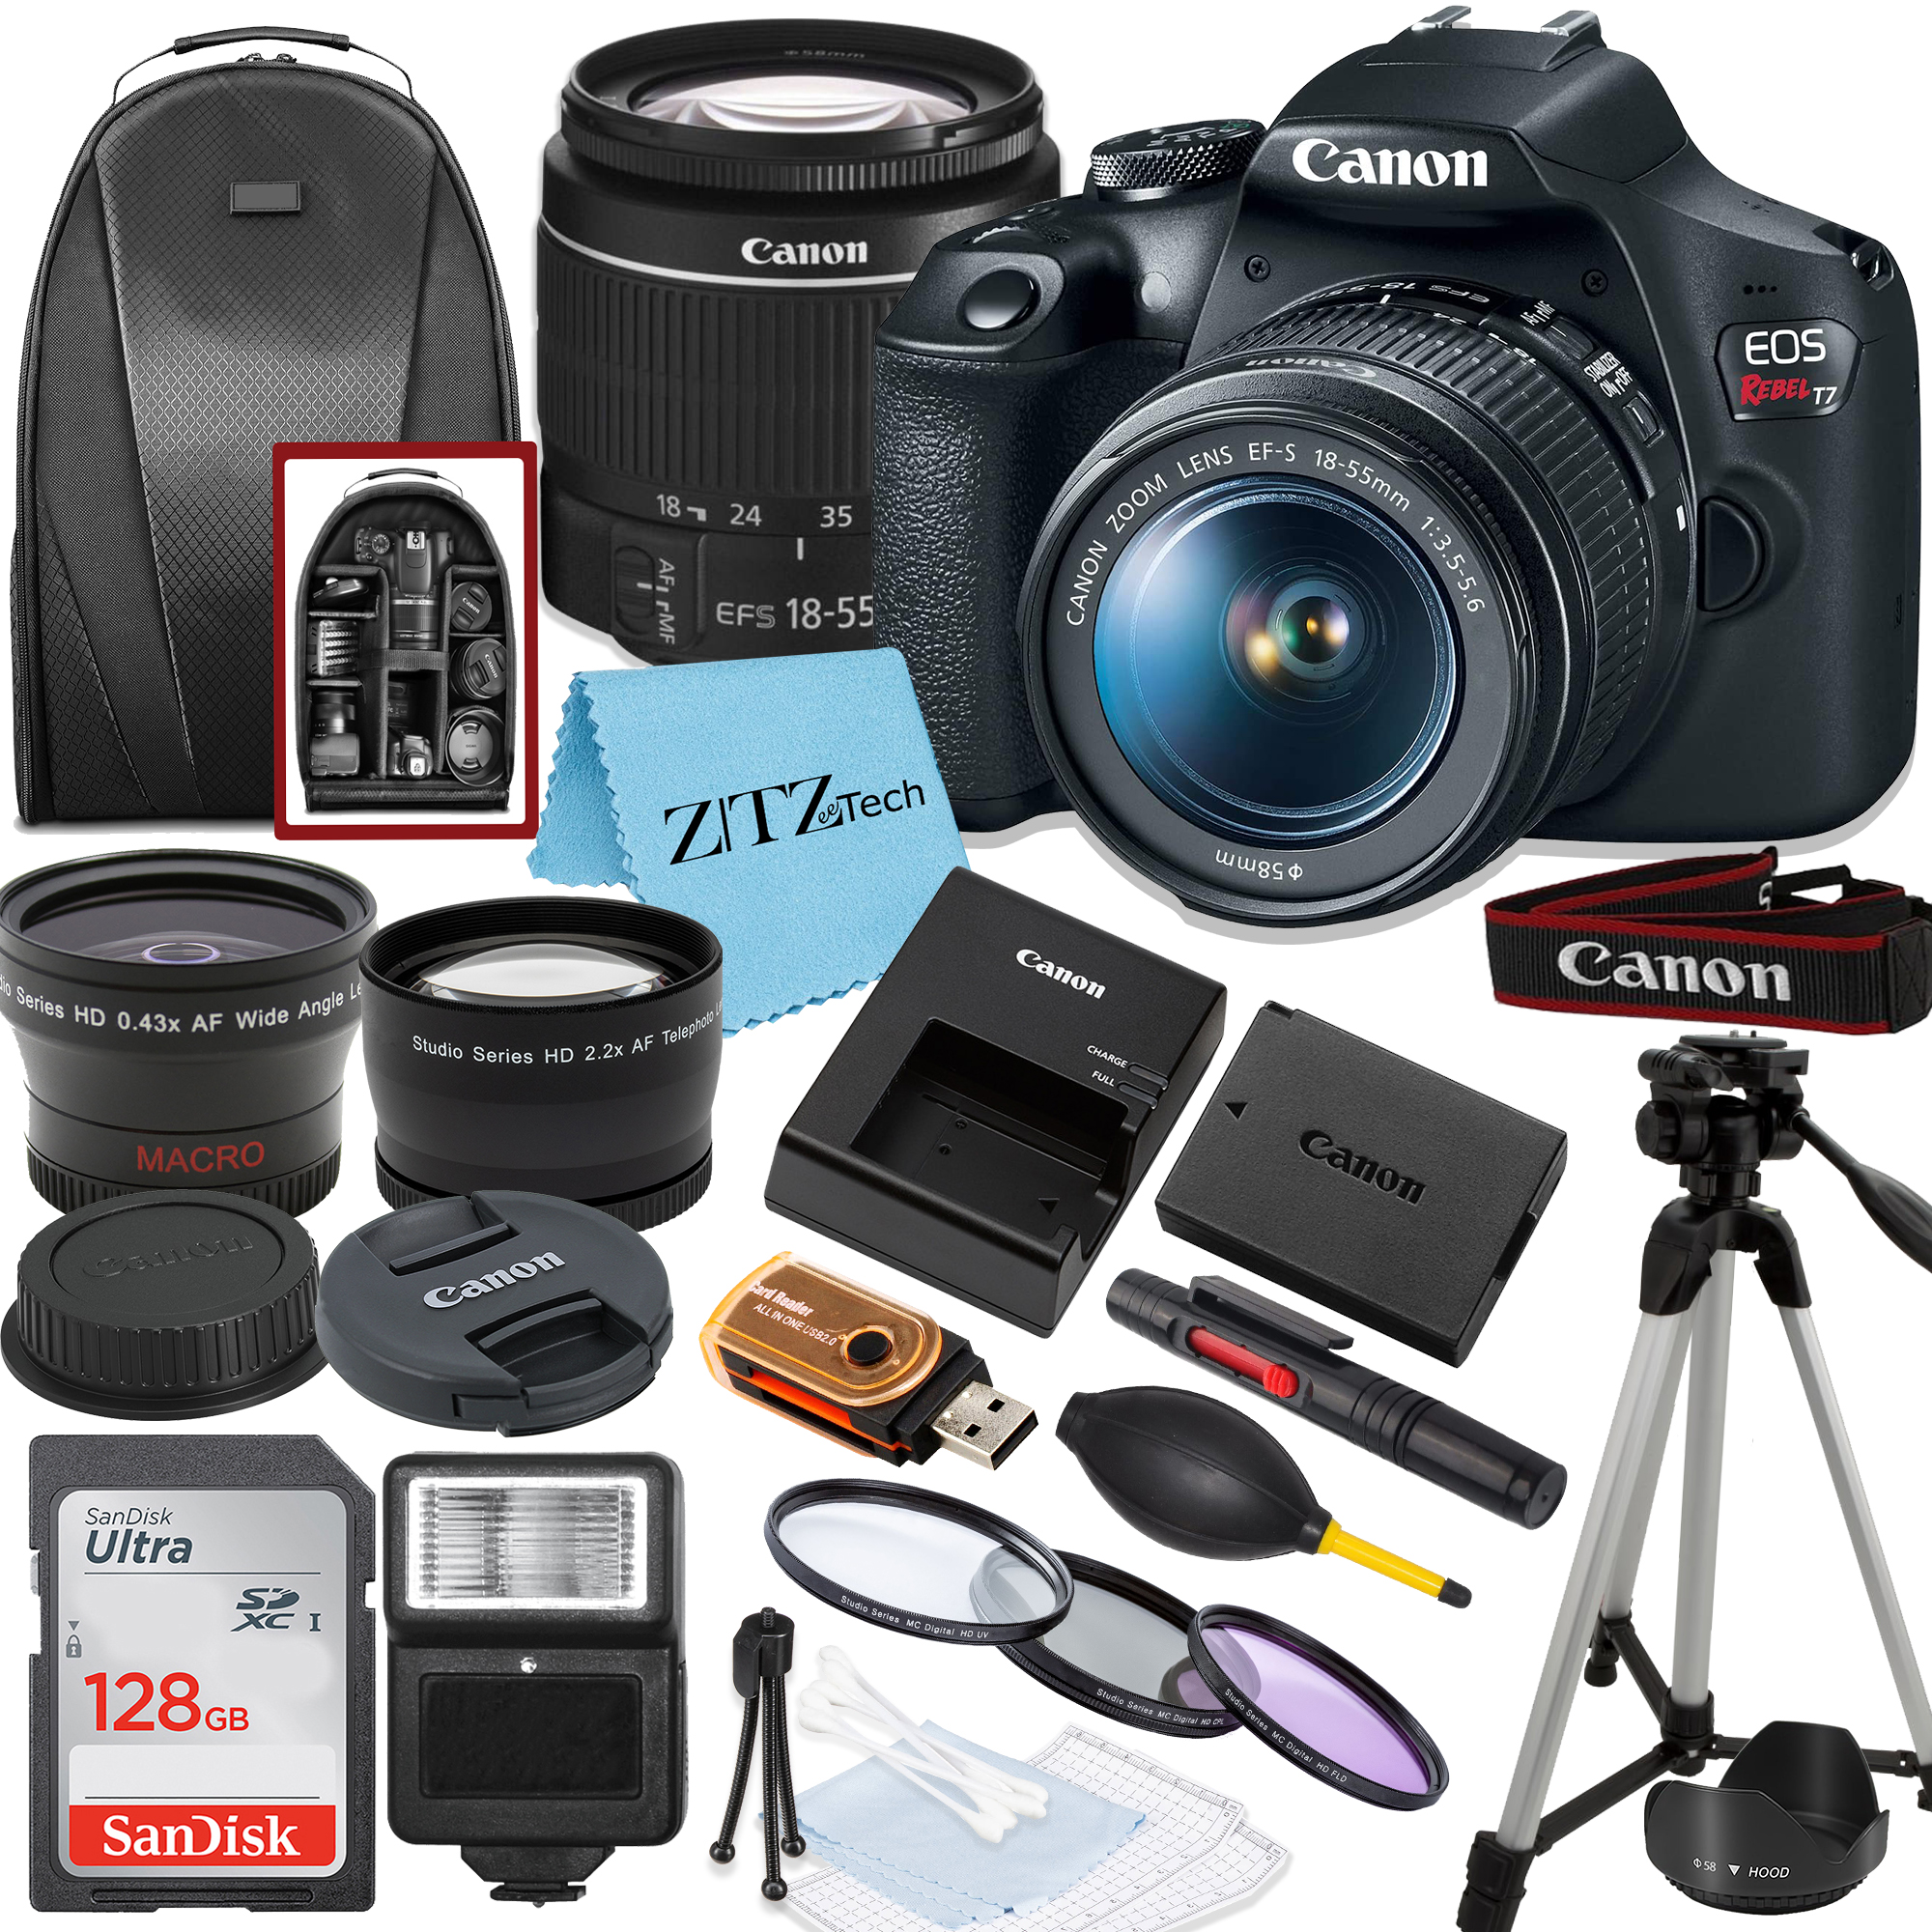 Canon EOS Rebel T7 DSLR Camera with 18-55mm Lens, SanDisk 128GB Memory, Tripod, Backpack and ZeeTech Bundle